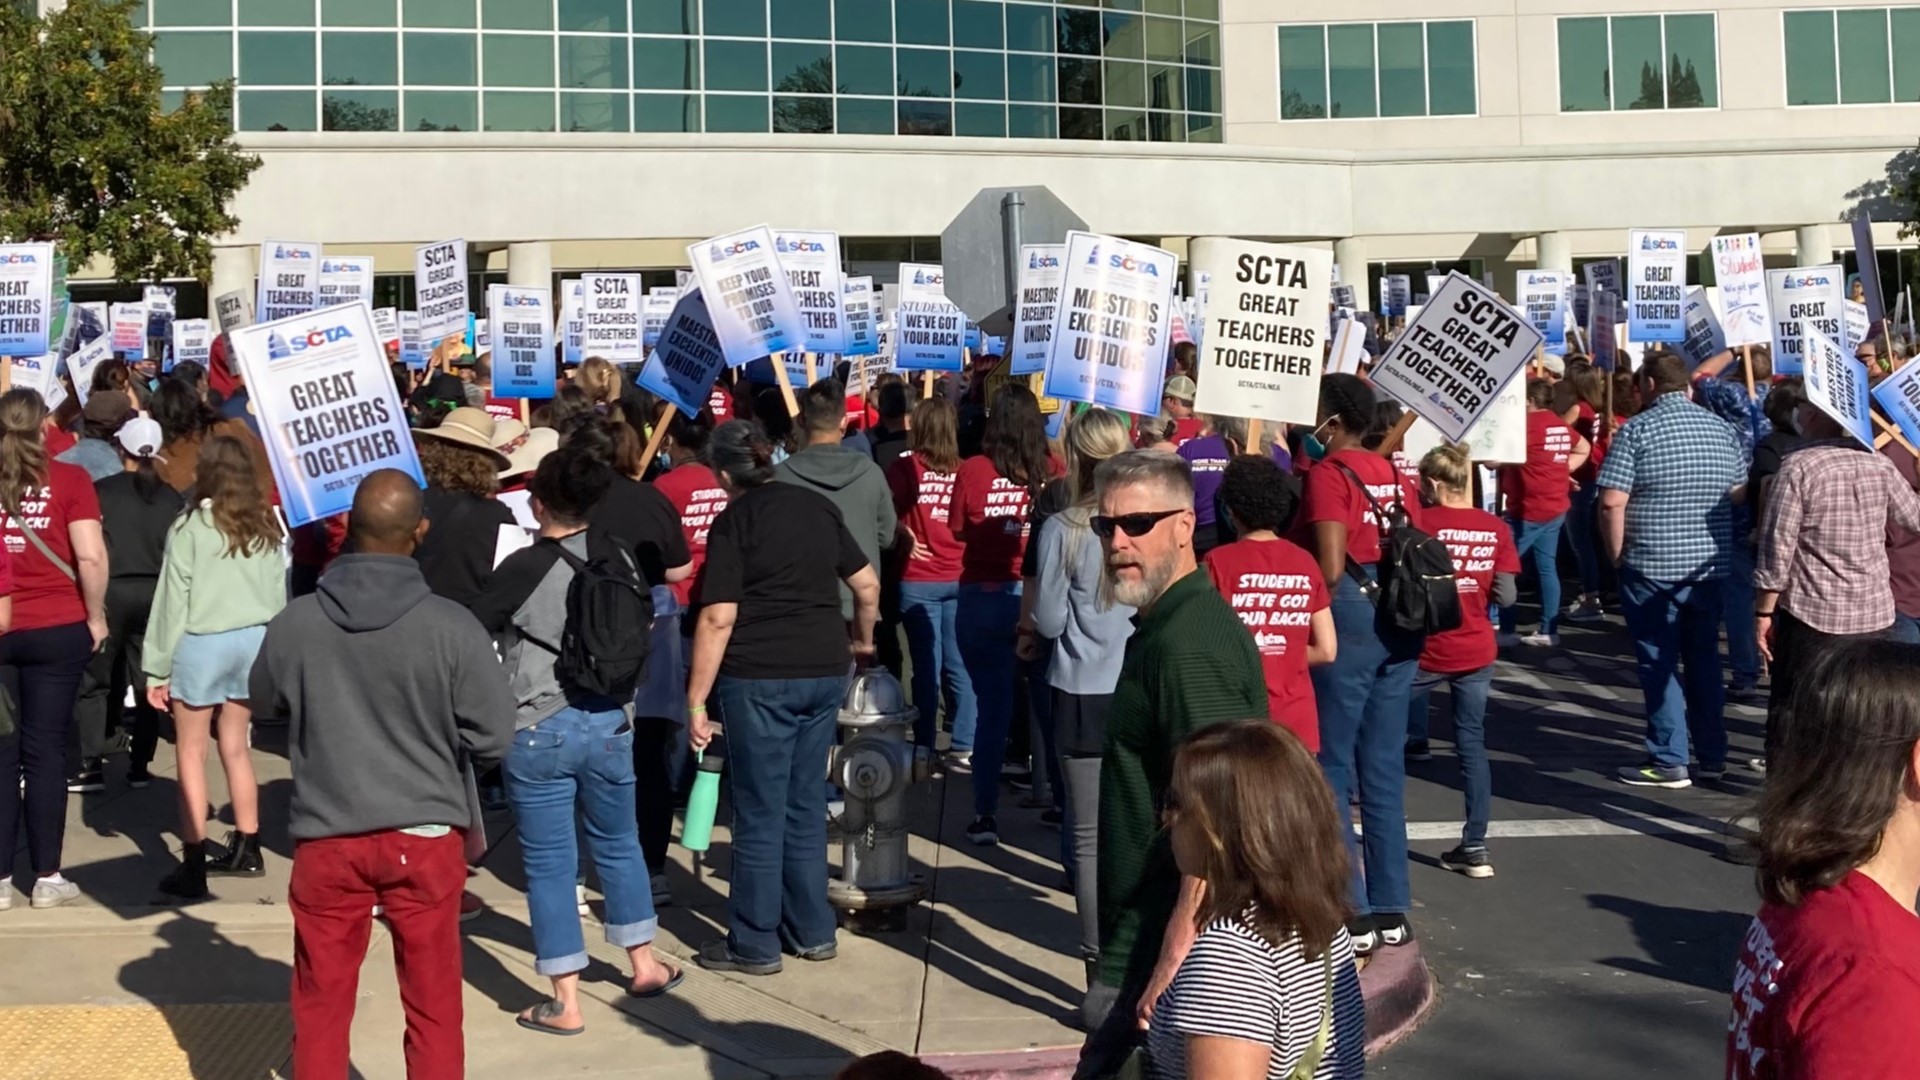 The district cited worries that families would suffer from the uncertainty and lack of stability if the schools were to close due to strikes.